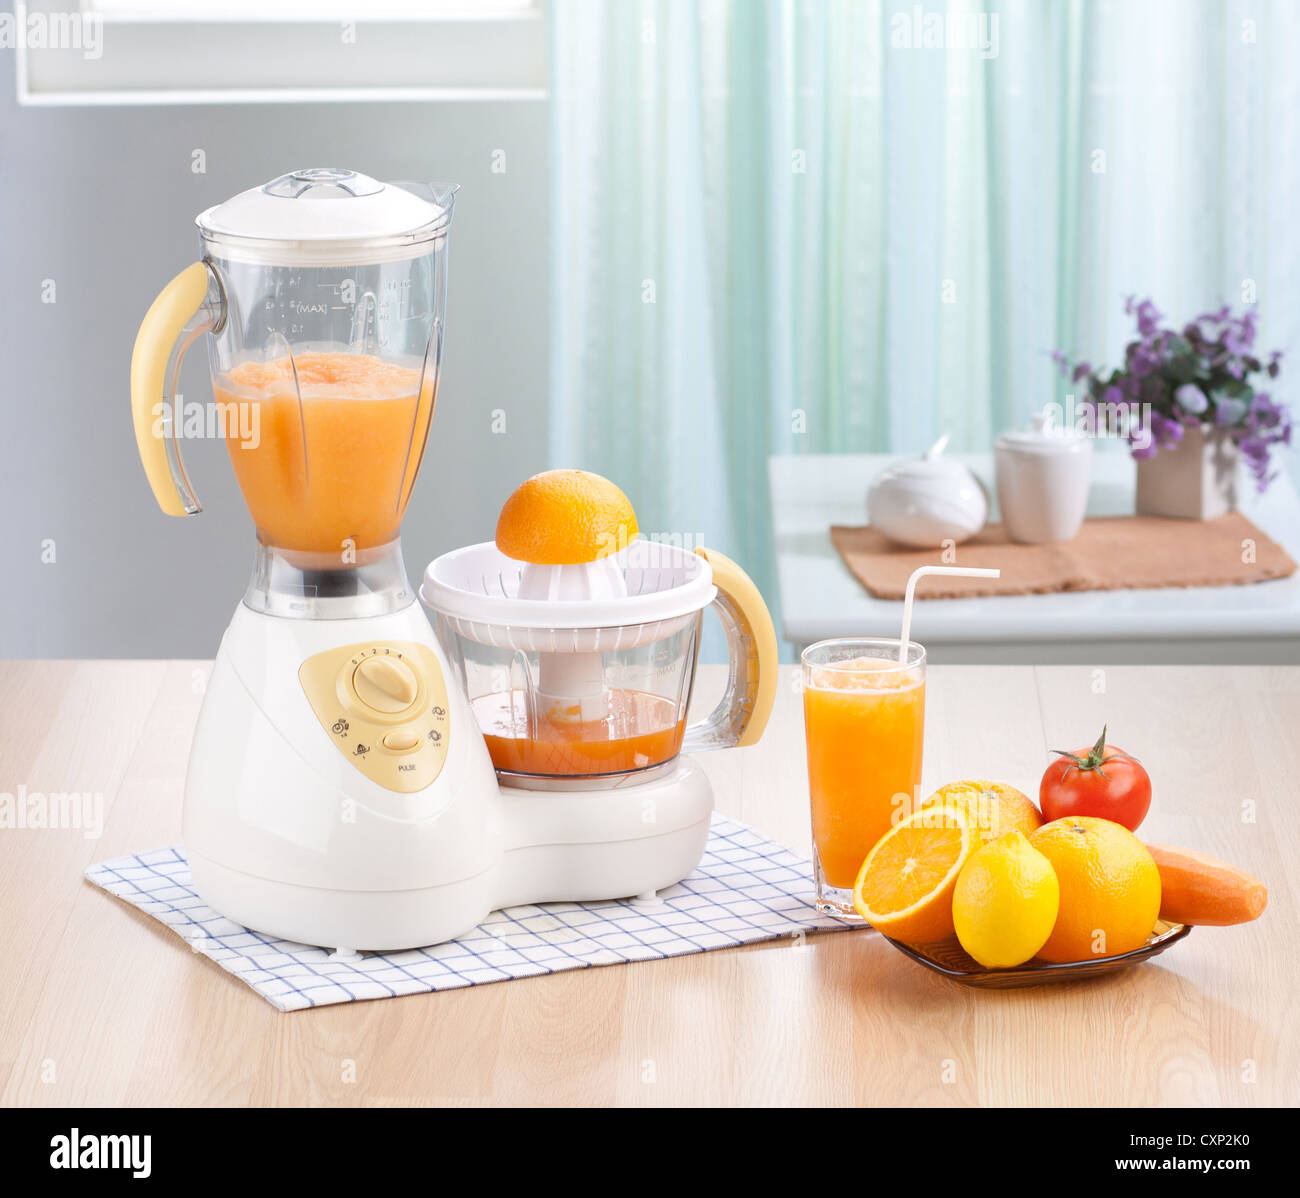 Electric juice blender machine the home appliance Stock Photo